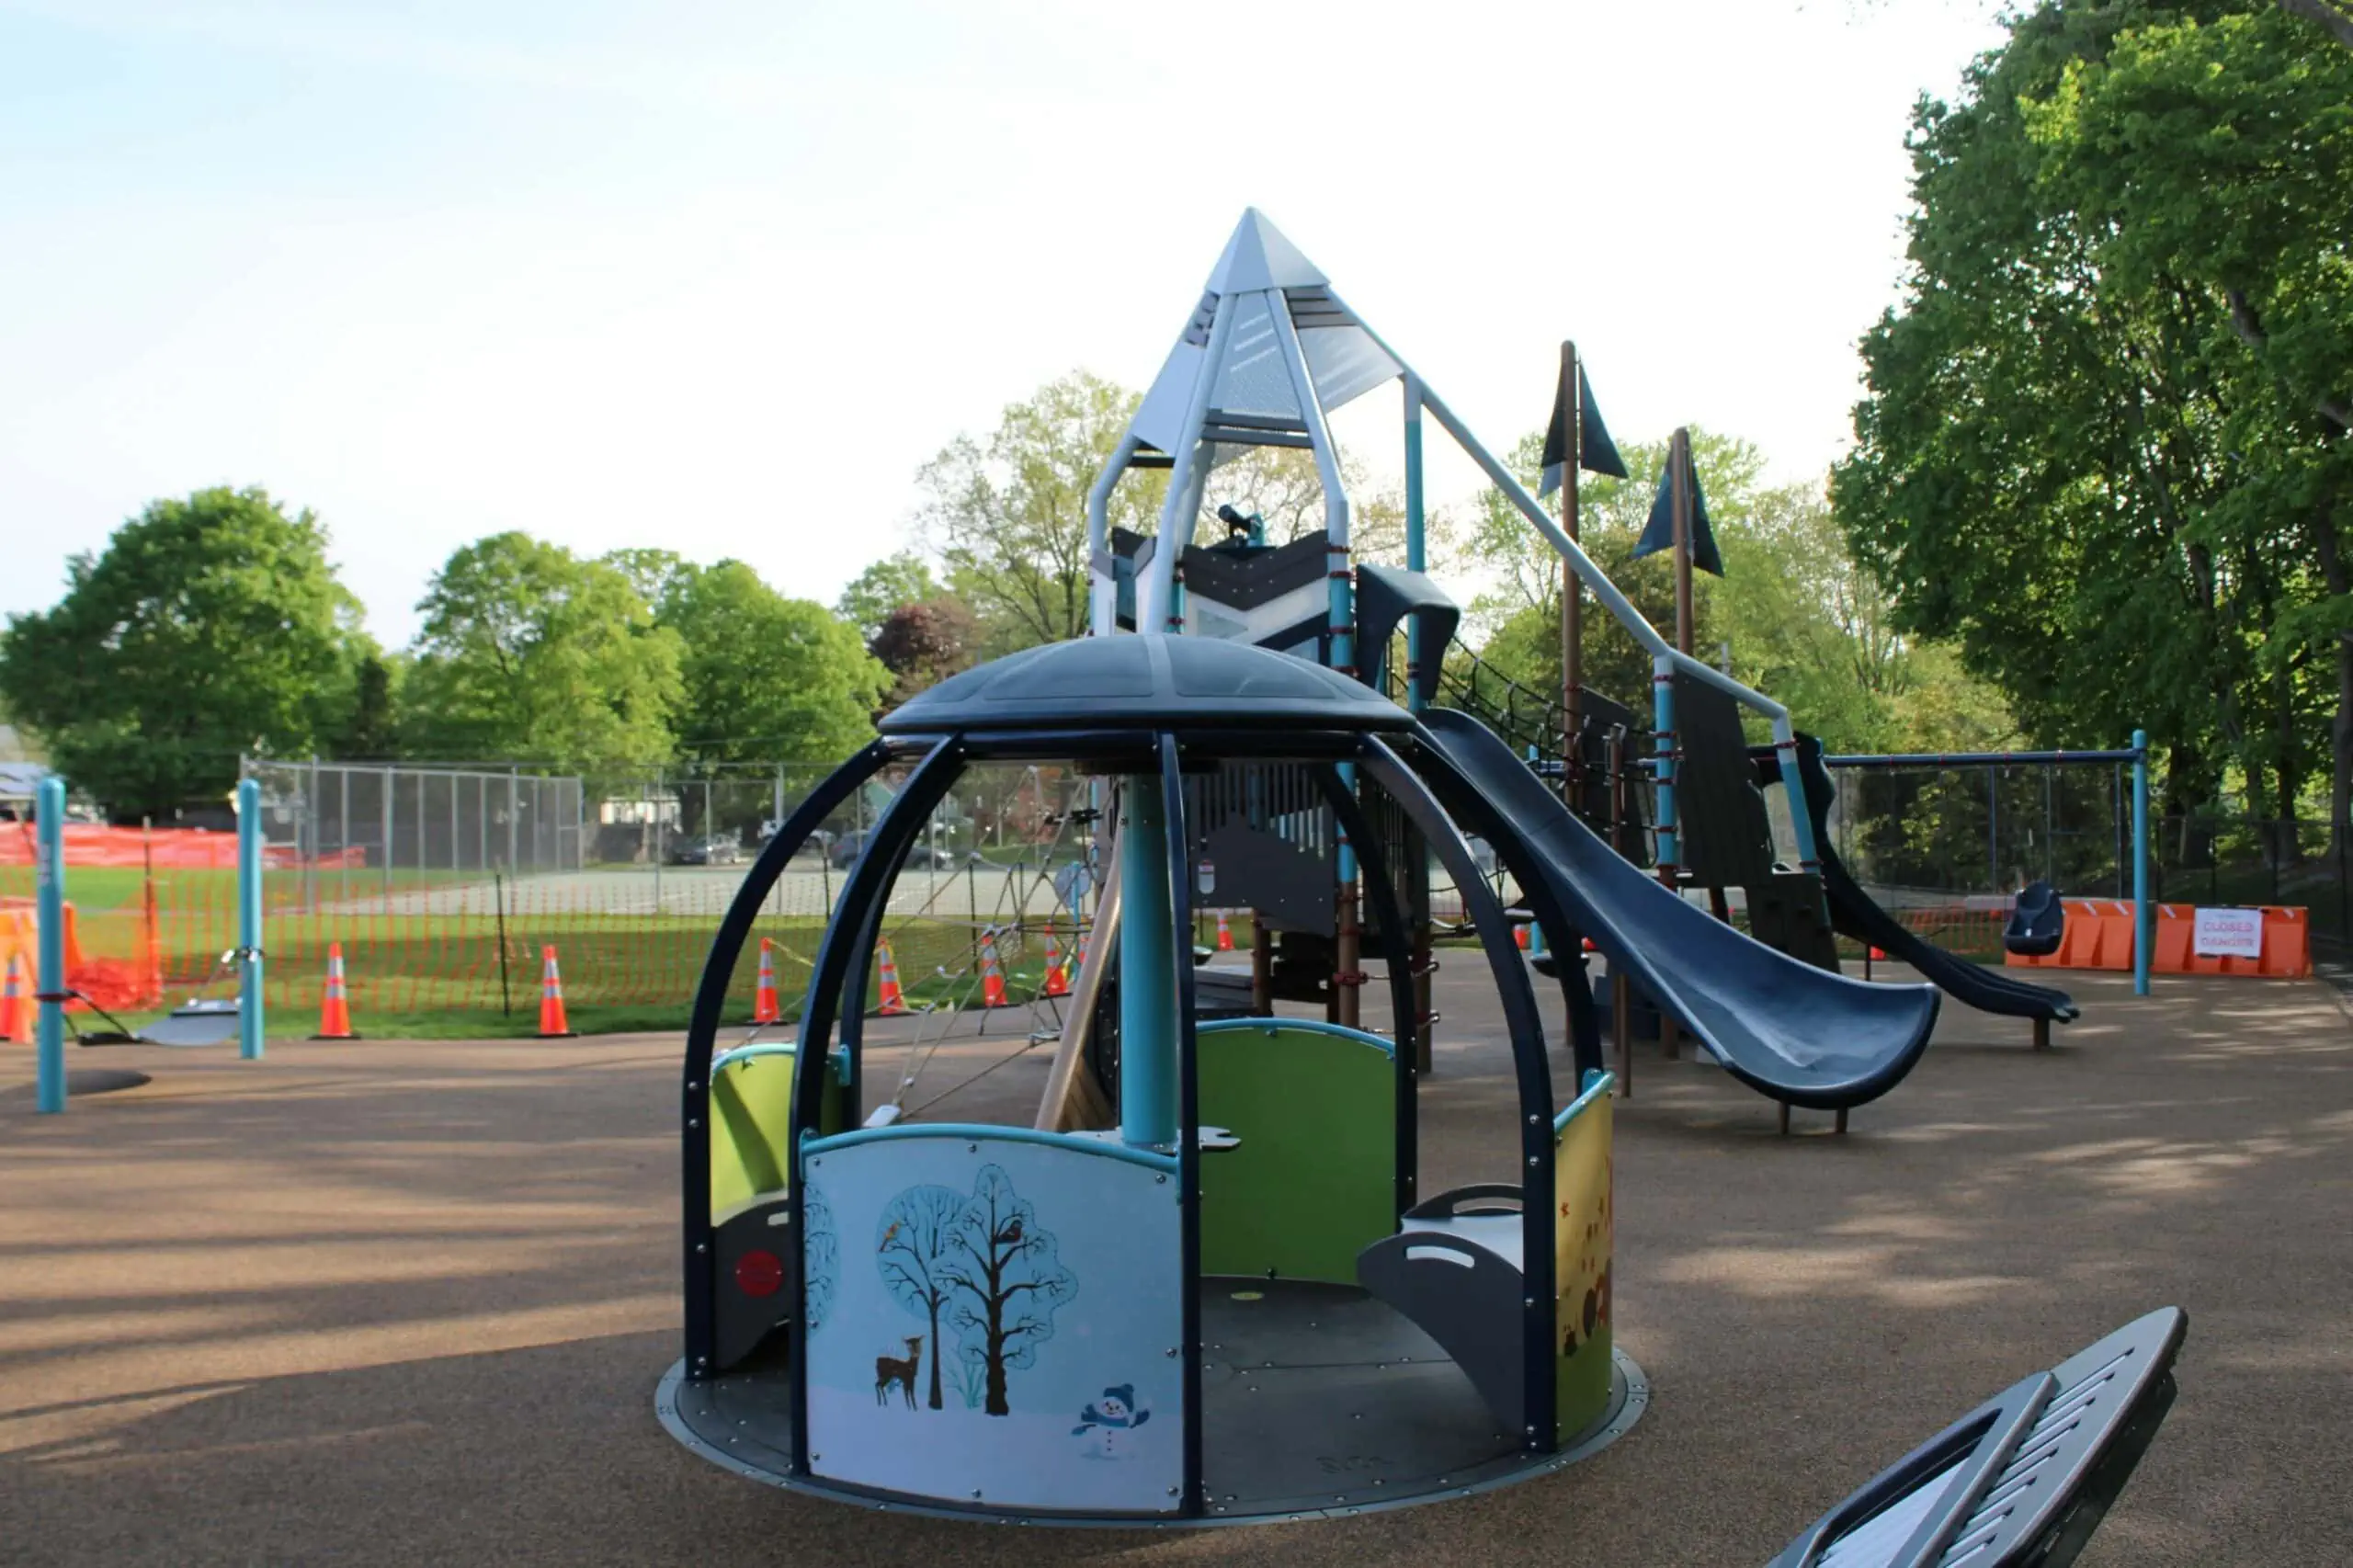 Playground at Armstrong school in Westborough almost finished